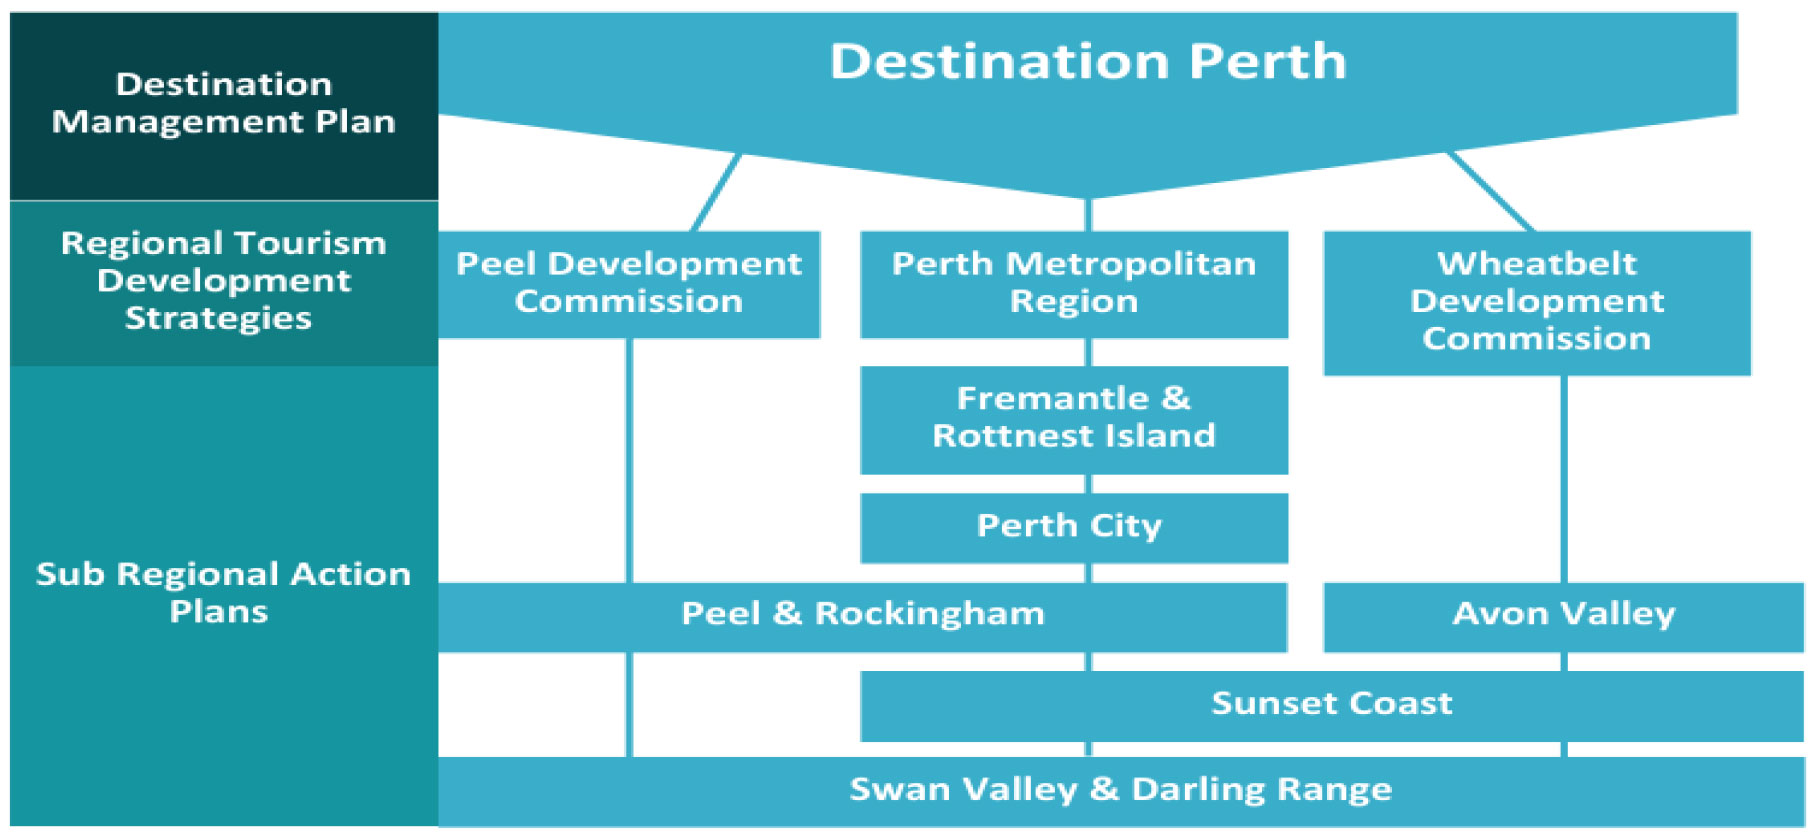 Diagram showing hierarchy of tourism with Perth at the top, and Peel, Fremantle, Rottnest and Wheatbelt under this.